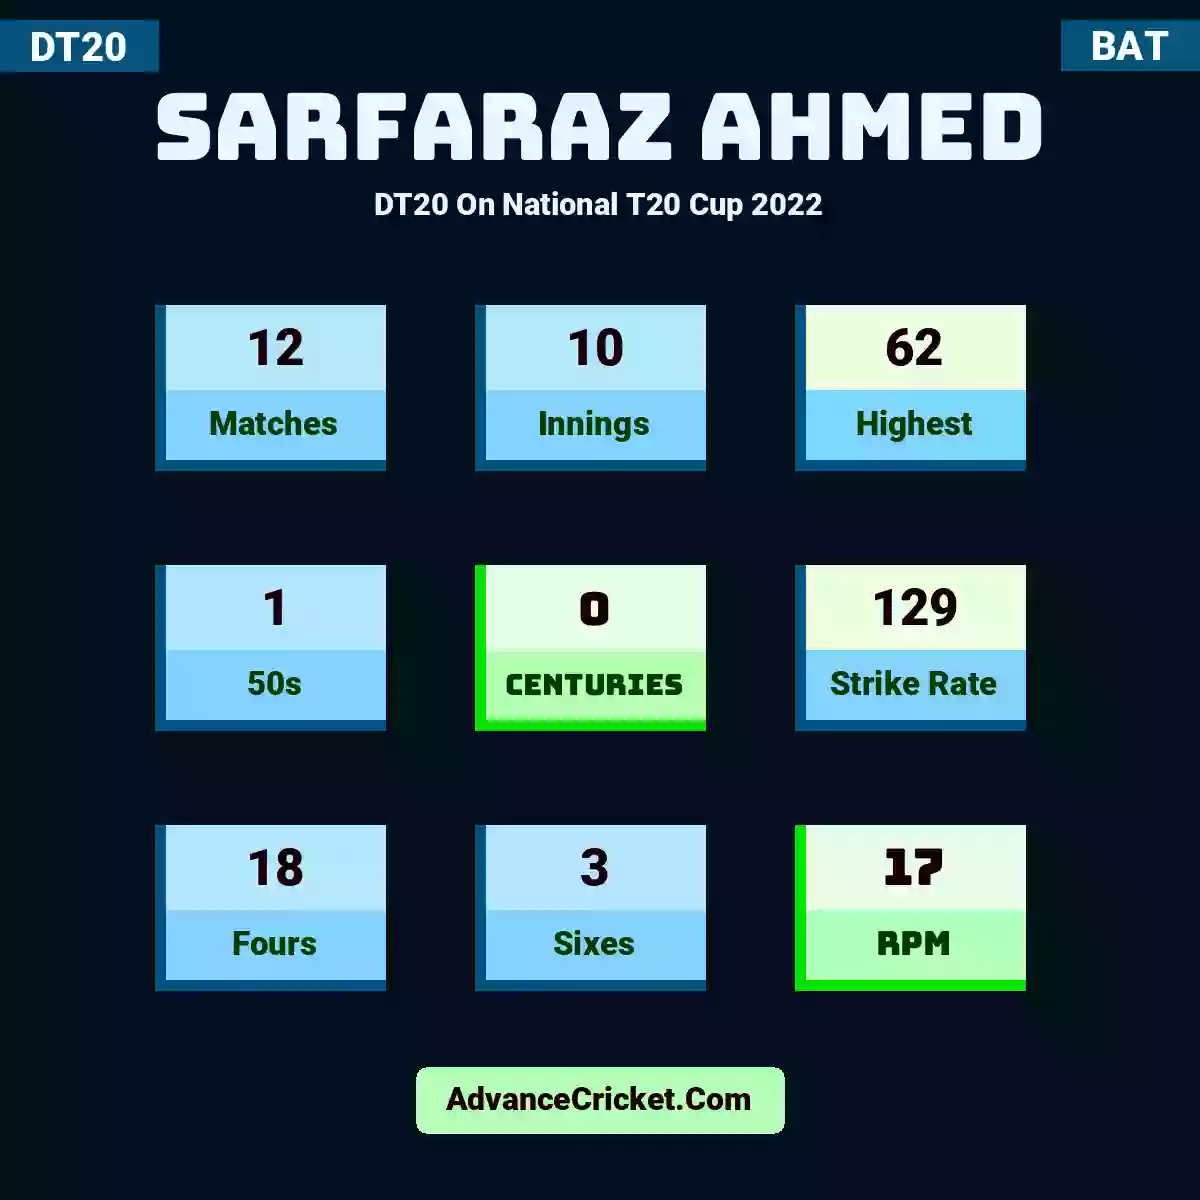 Sarfaraz Ahmed DT20  On National T20 Cup 2022, Sarfaraz Ahmed played 12 matches, scored 62 runs as highest, 1 half-centuries, and 0 centuries, with a strike rate of 129. S.Ahmed hit 18 fours and 3 sixes, with an RPM of 17.